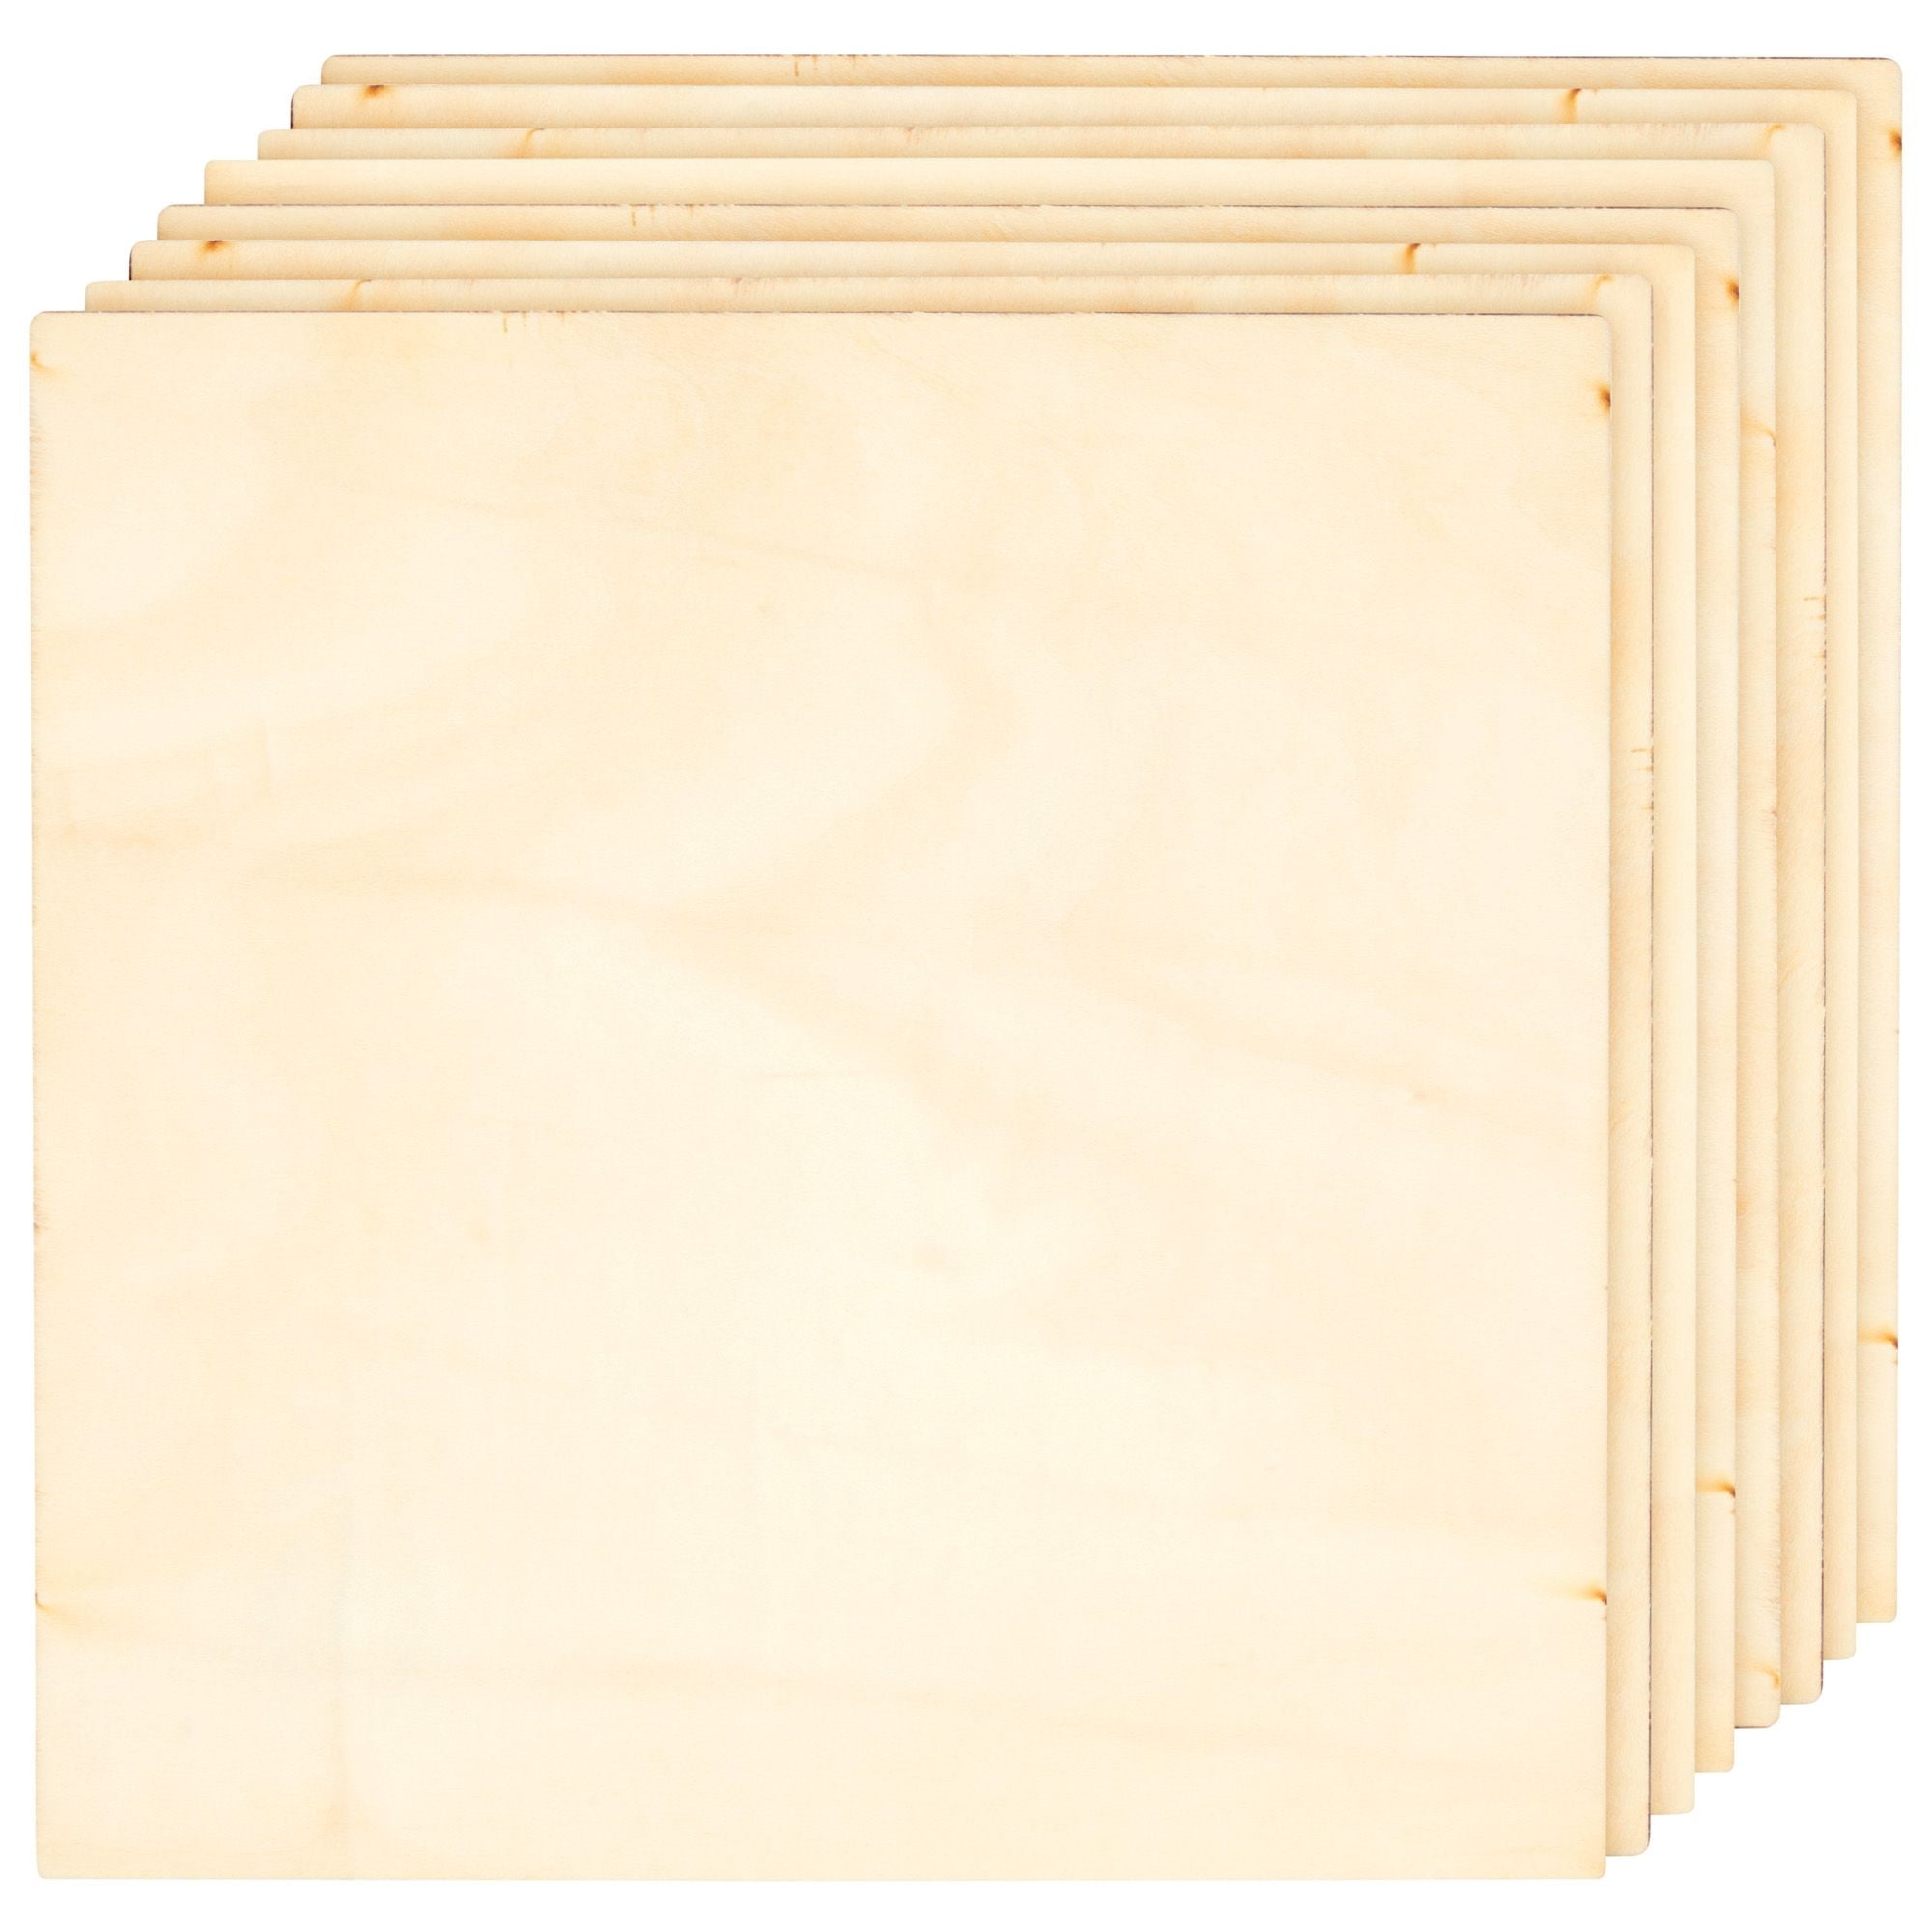 8 Pack Thin 8x8 Wood Squares for DIY Crafts, Unfinished 1/8 Inch Basswood  Plywood for Laser Cutting, Wood Burning